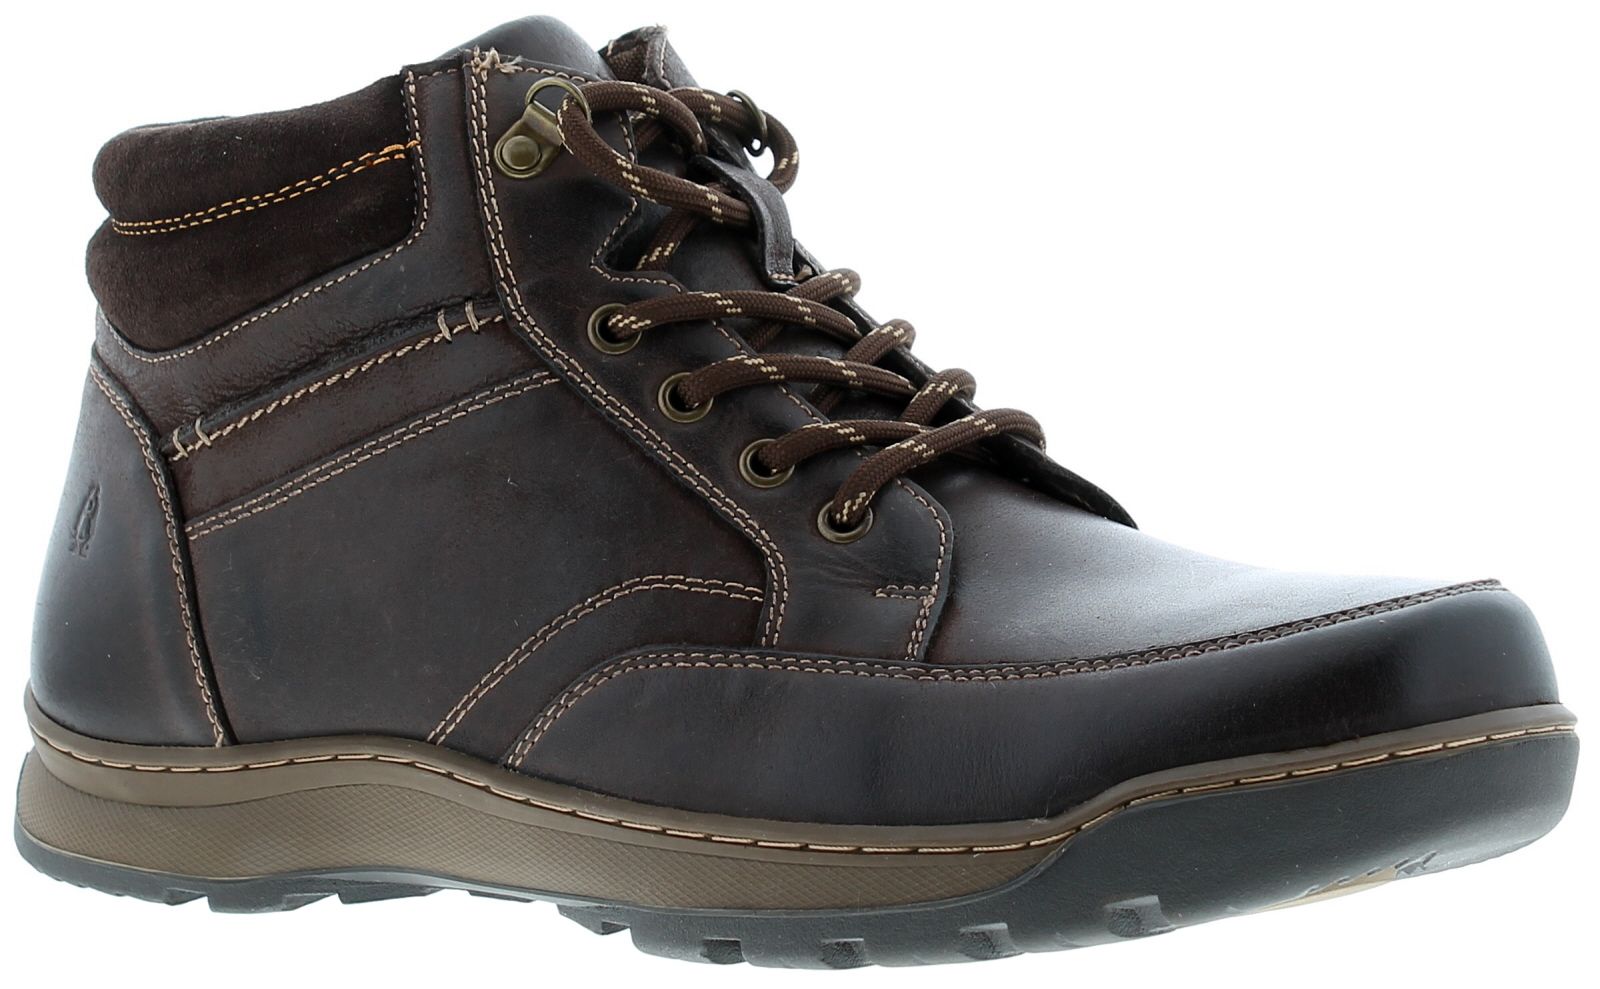 Men's Alpine boot; Grover is crafted with leather, padded suede and has a comfortable cushioned memory foam footbed. The hardwearing flexible sole unit makes this the perfect smart all day footwear.Leather upper with padded suede collar. 
Breathable textile lining. 
Lace up fastening. 
Memory foam comfort insole. 
Heardwearing rubber sole unit.